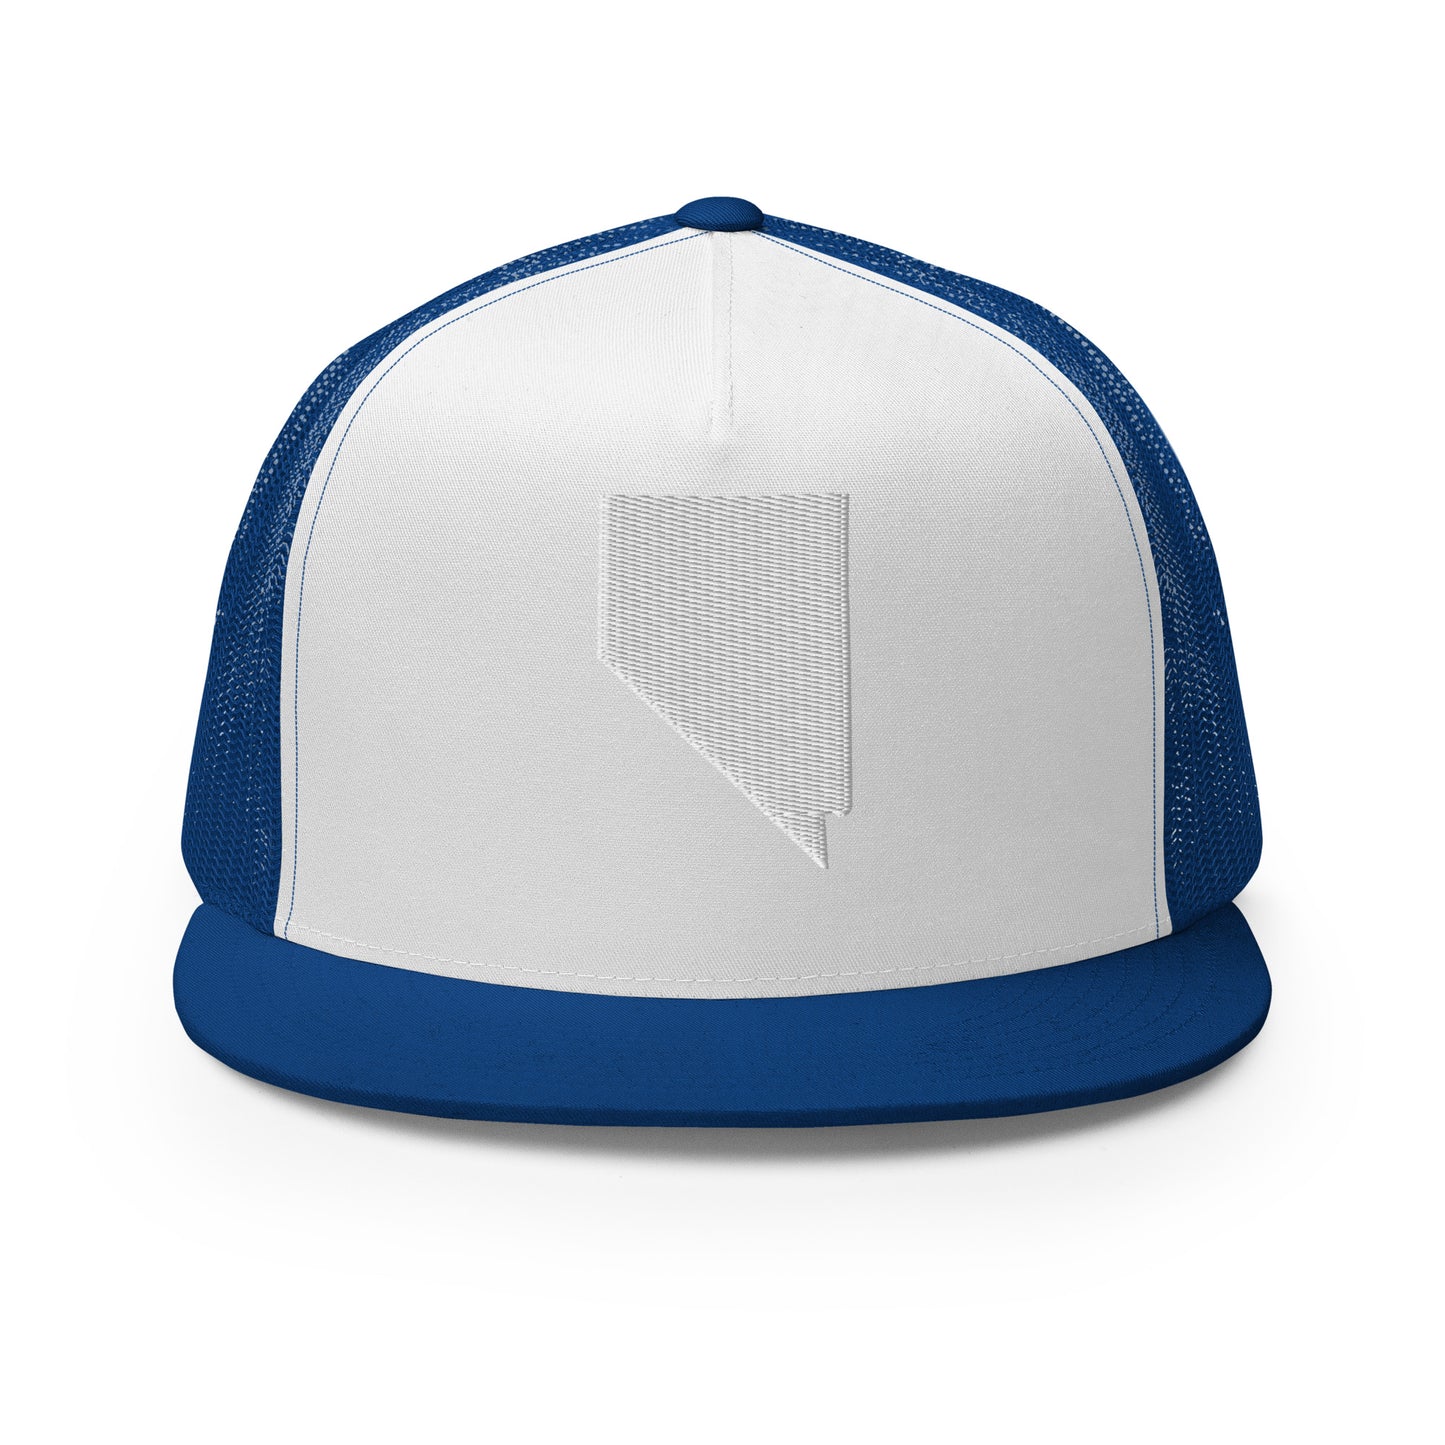 Nevada State Silhouette High 5 Panel A-Frame Snapback Trucker Hat